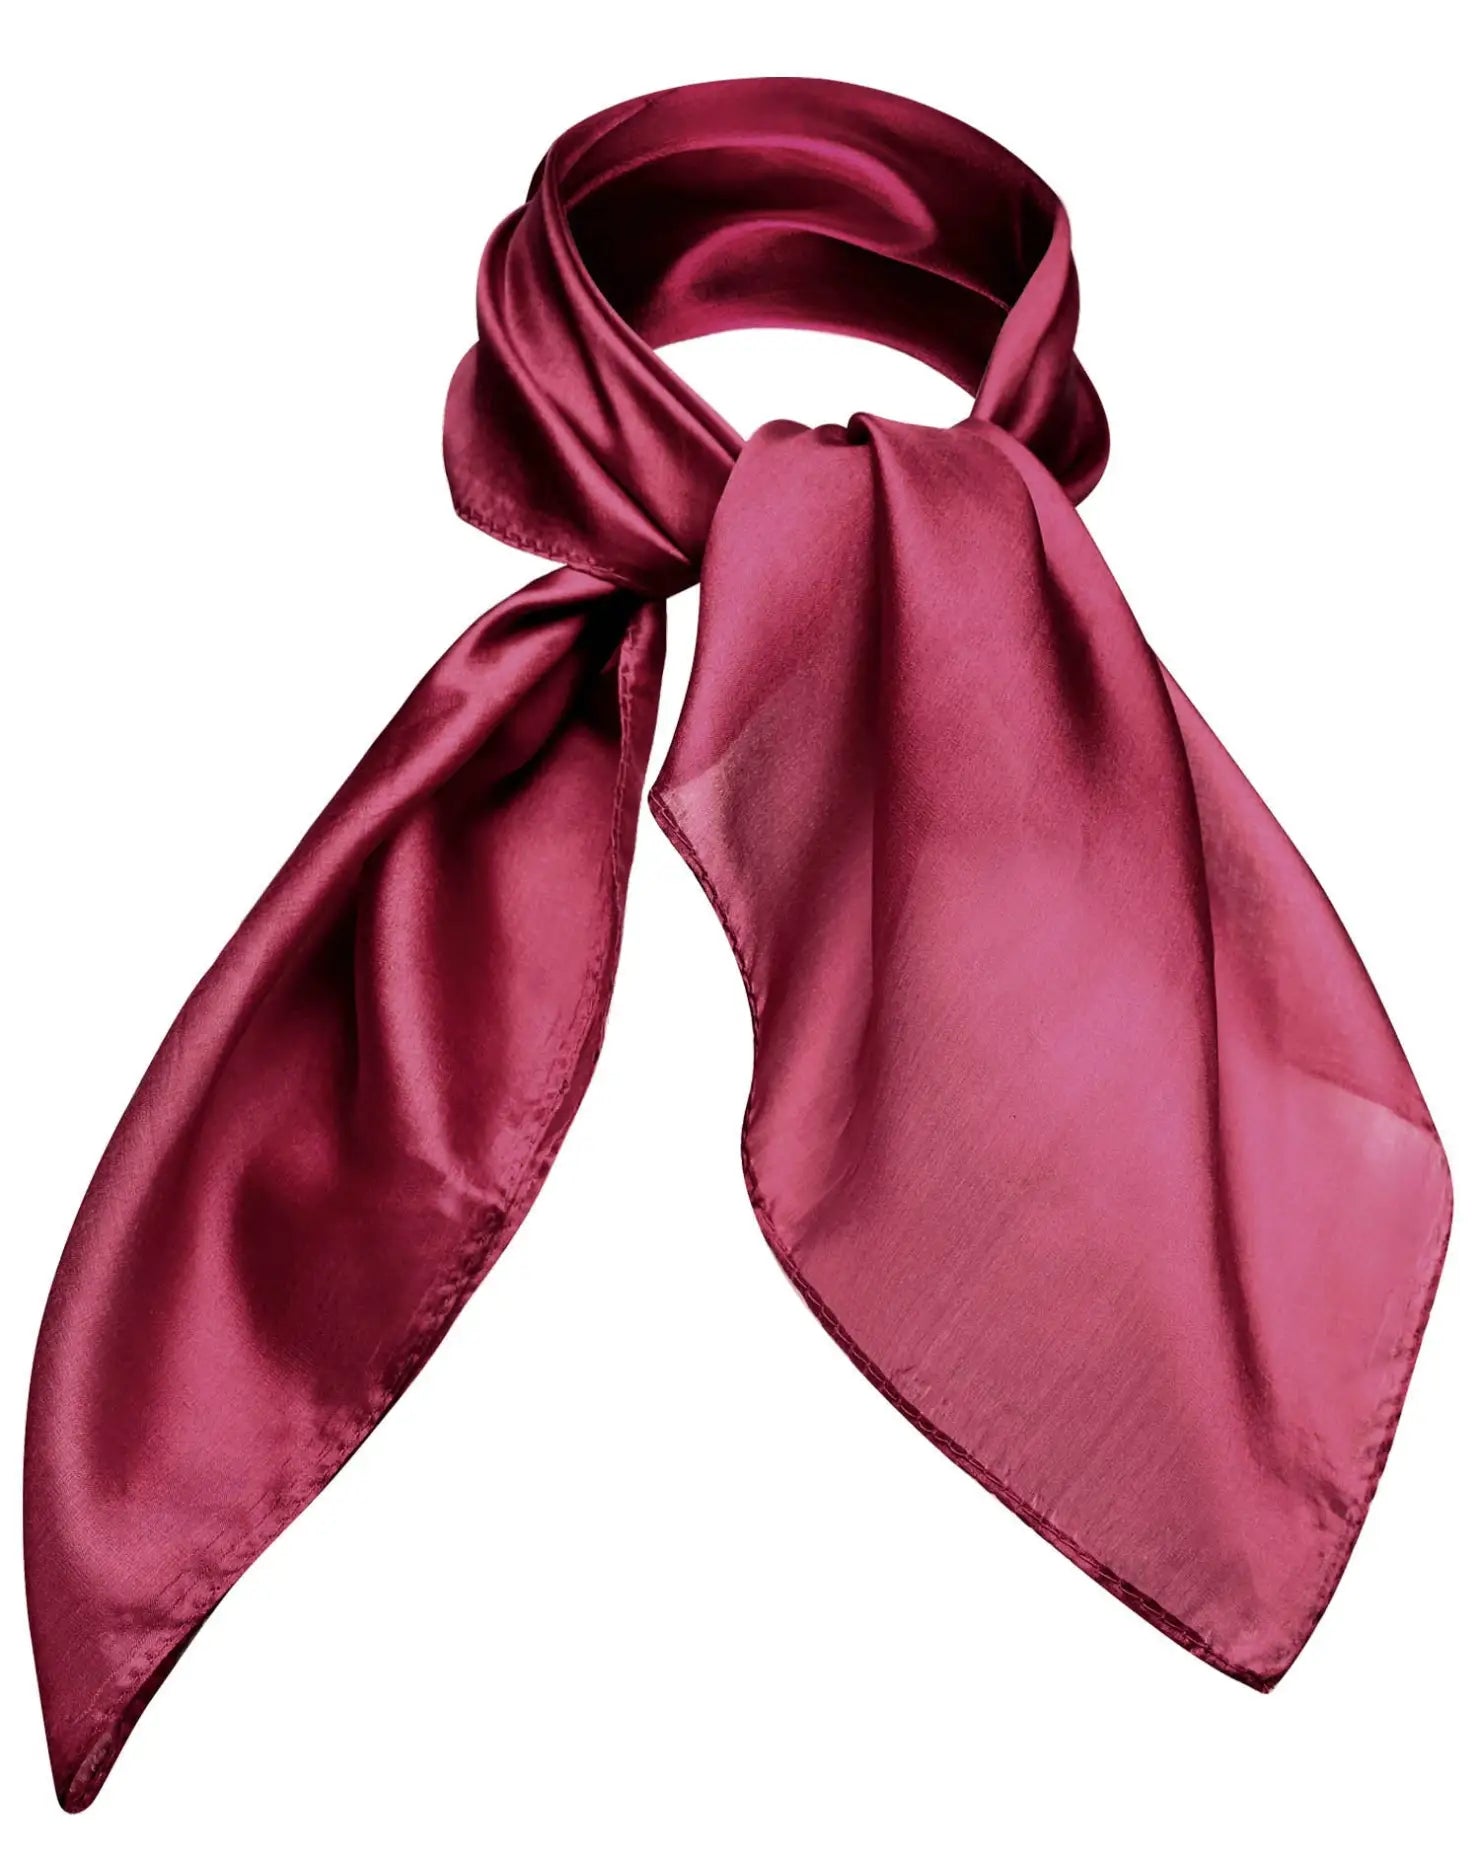 Pink Mulberry Silk Small Square Scarf on White Background